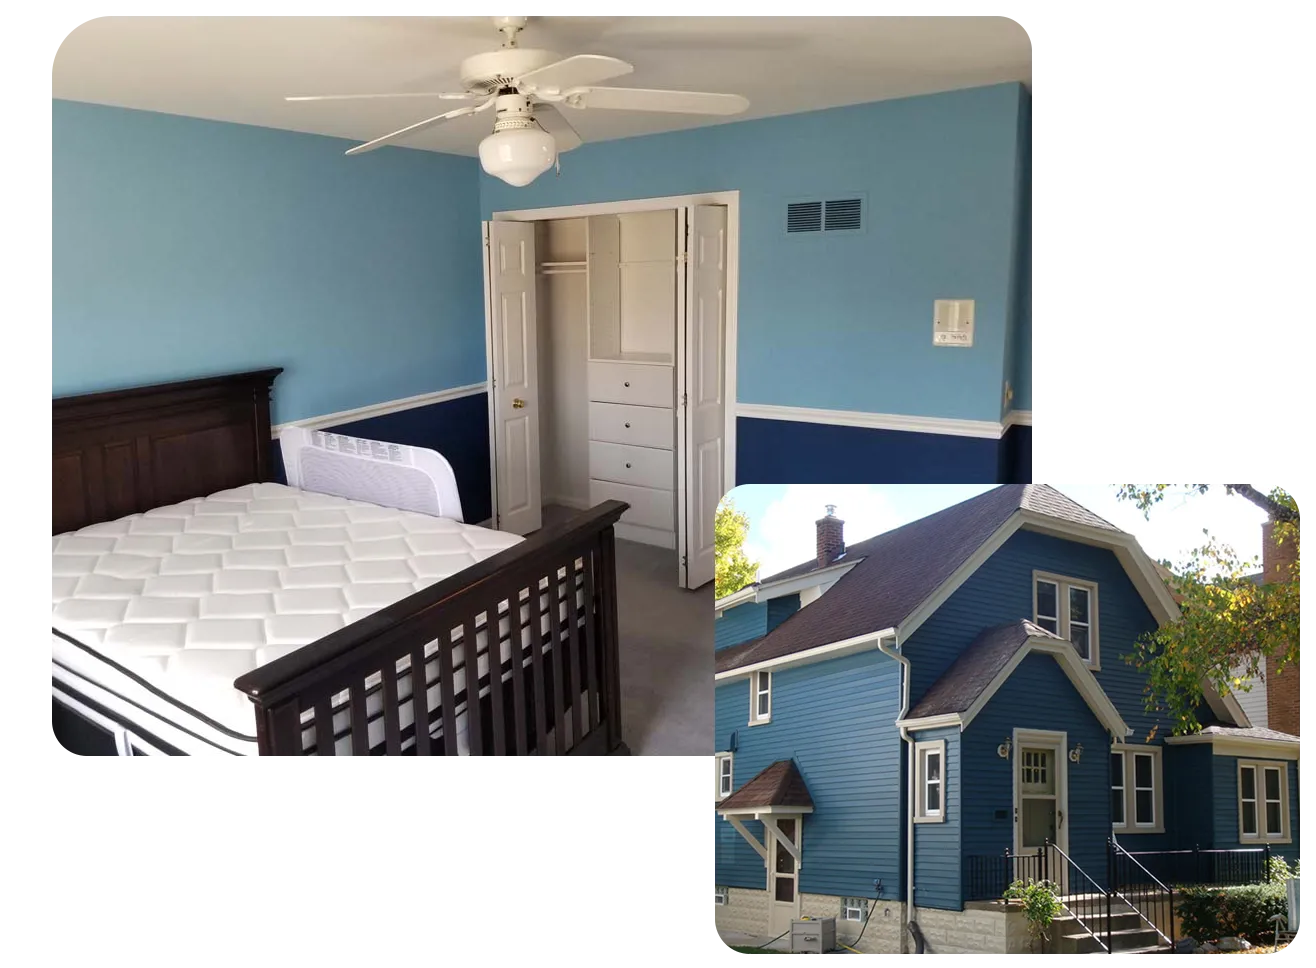 Exterior and Interior look at a home painted blue